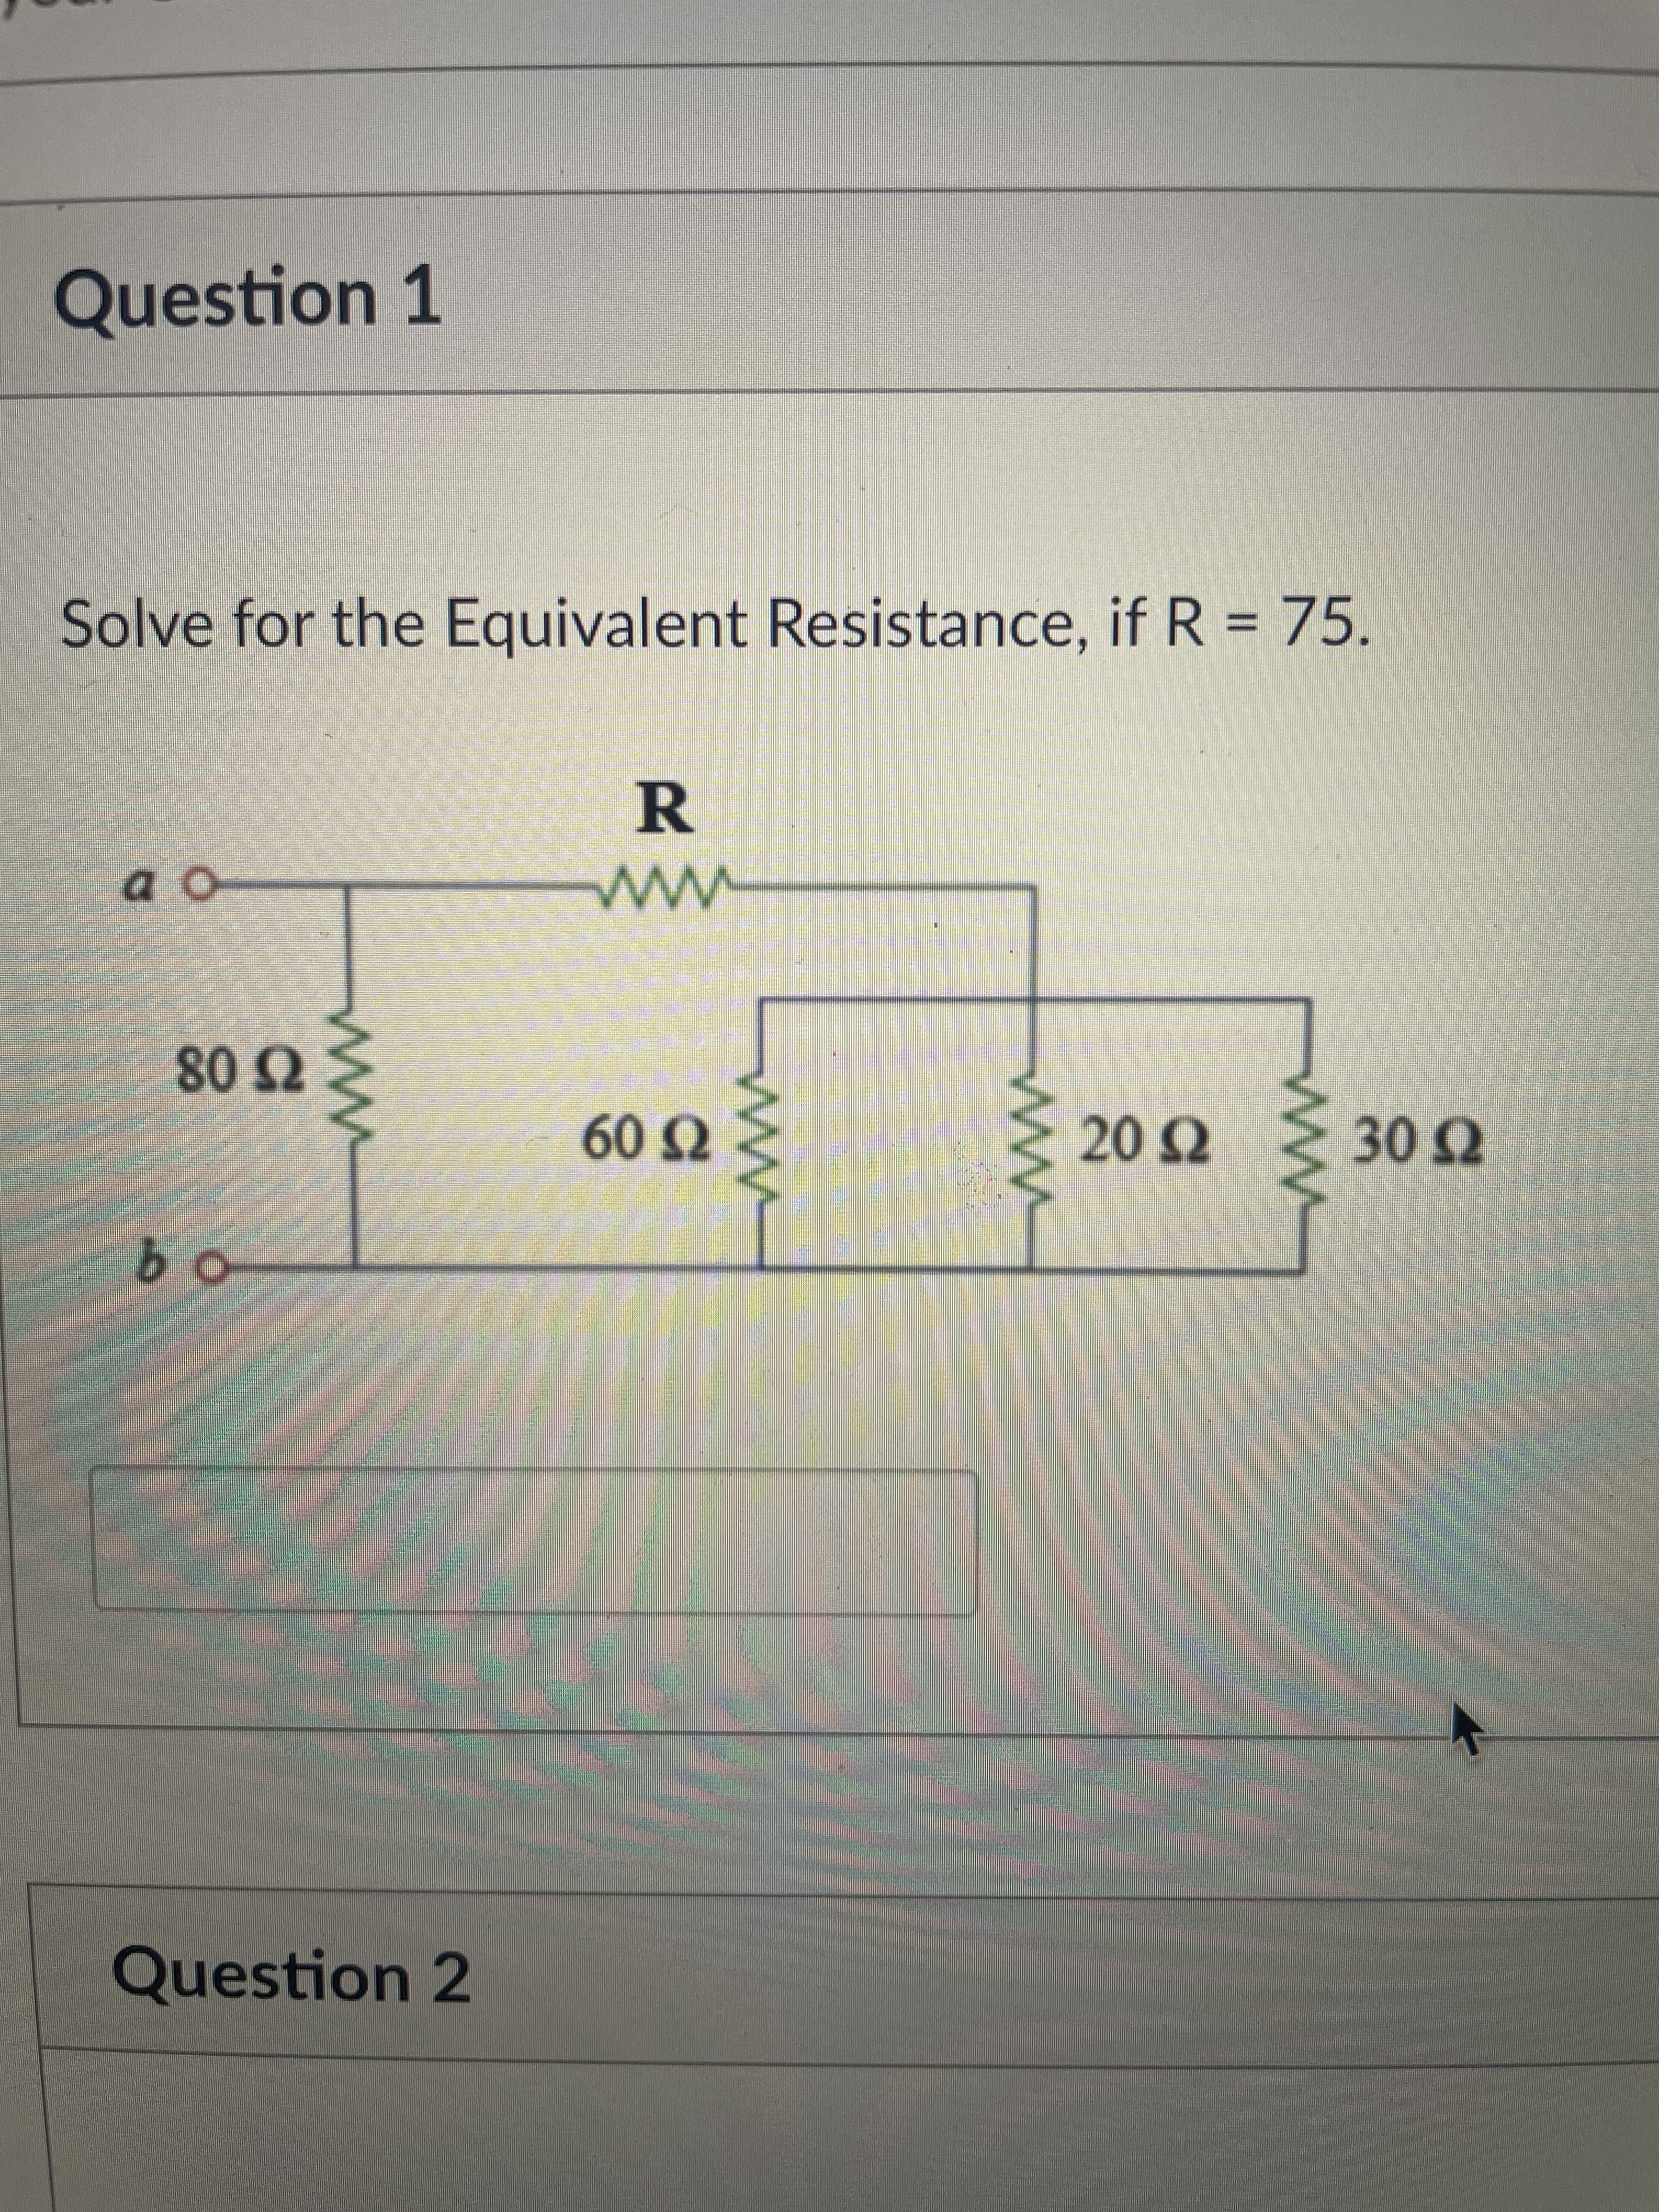 ww
ww
ww
Question 1
Solve for the Equivalent Resistance, if R = 75.
R
a o
08
O 09
లెట్ కో
Question 2
